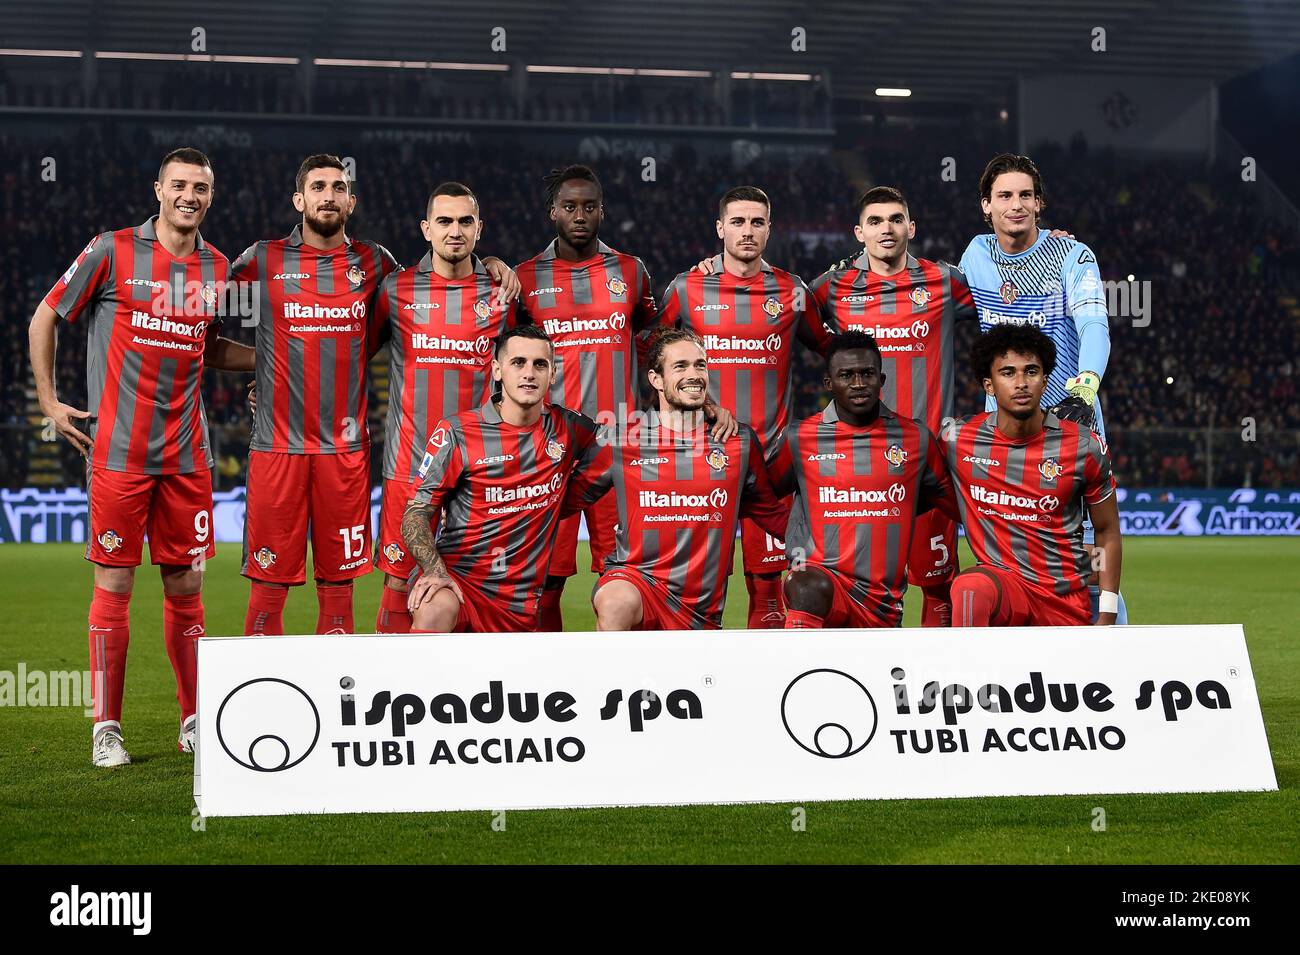 Cremona, Italy. 08 November 2022. Players of US Cremonese pose for a team photo prior to the Serie A football match between US Cremonese and AC Milan. Credit: Nicolò Campo/Alamy Live News Stock Photo